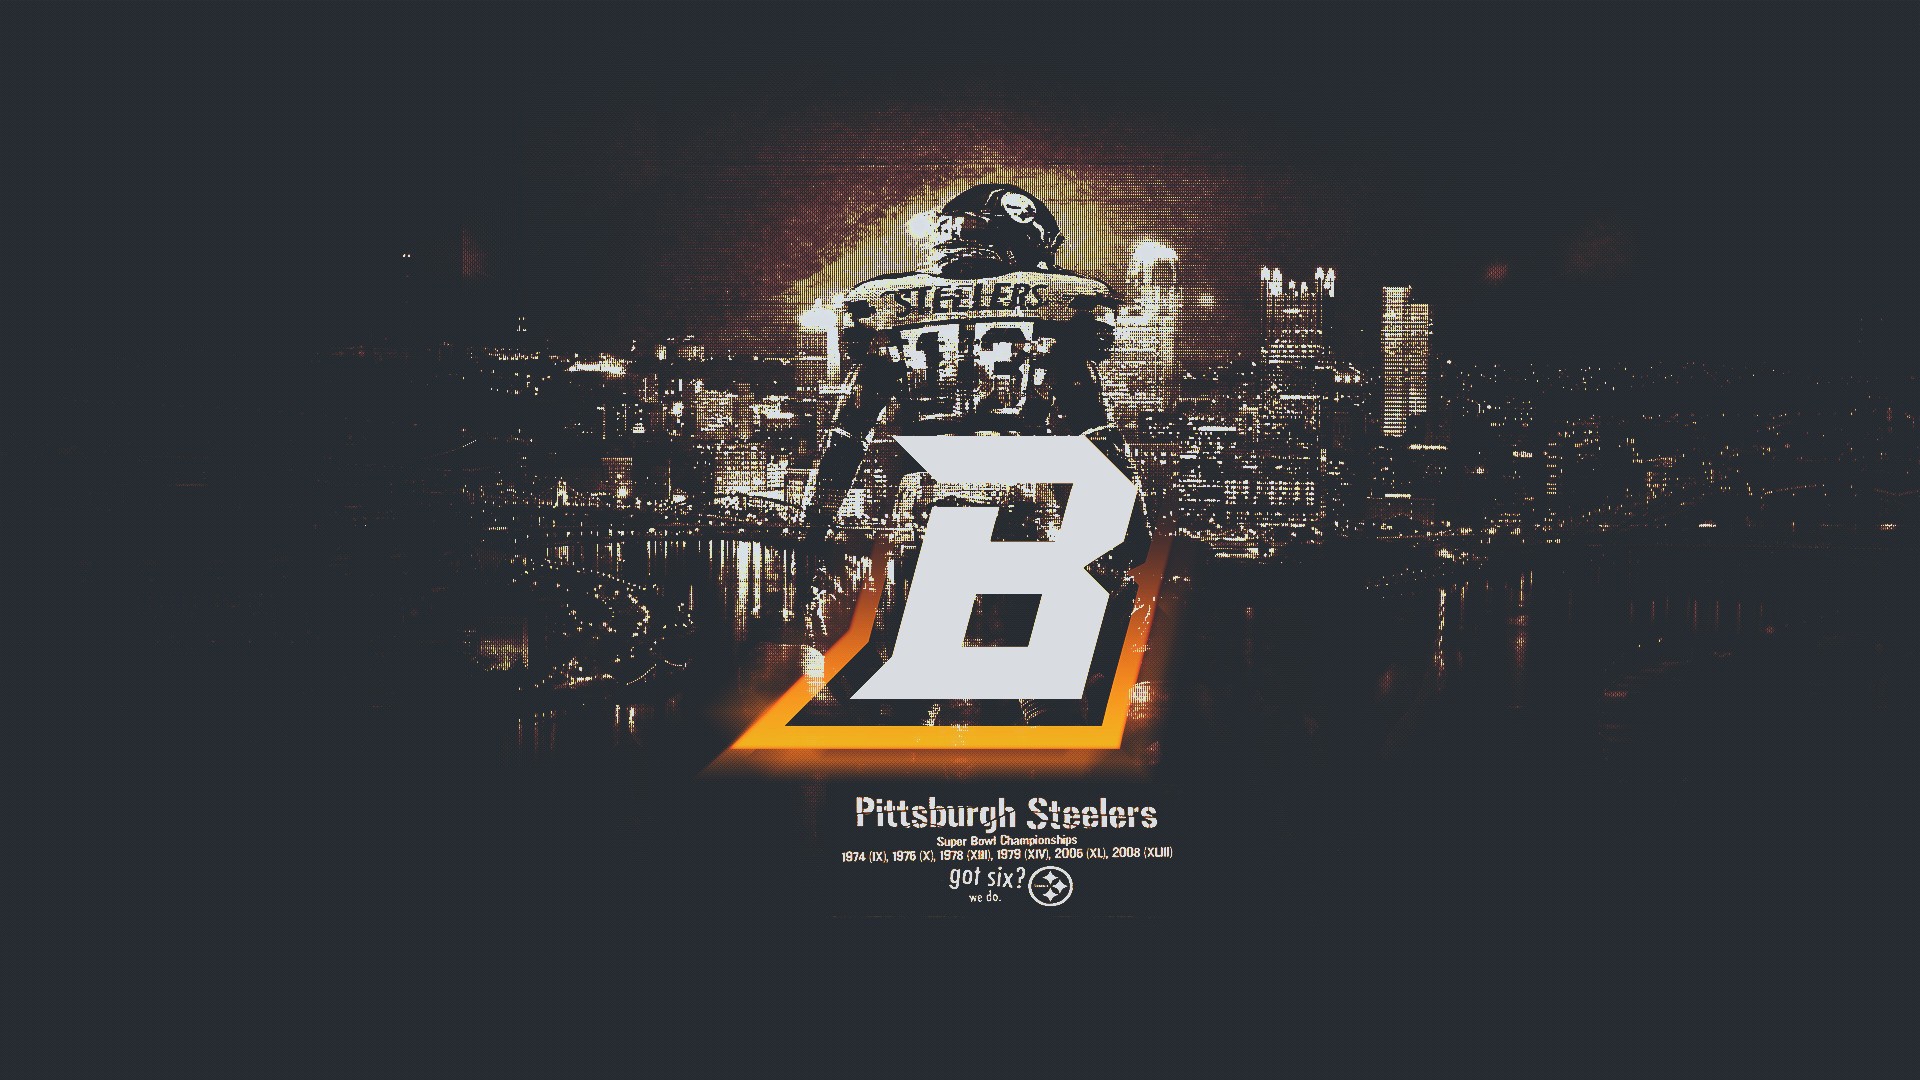 Wallpapers Steelers With Resolution 1920X1080 pixel. You can make this wallpaper for your Mac or Windows Desktop Background, iPhone, Android or Tablet and another Smartphone device for free